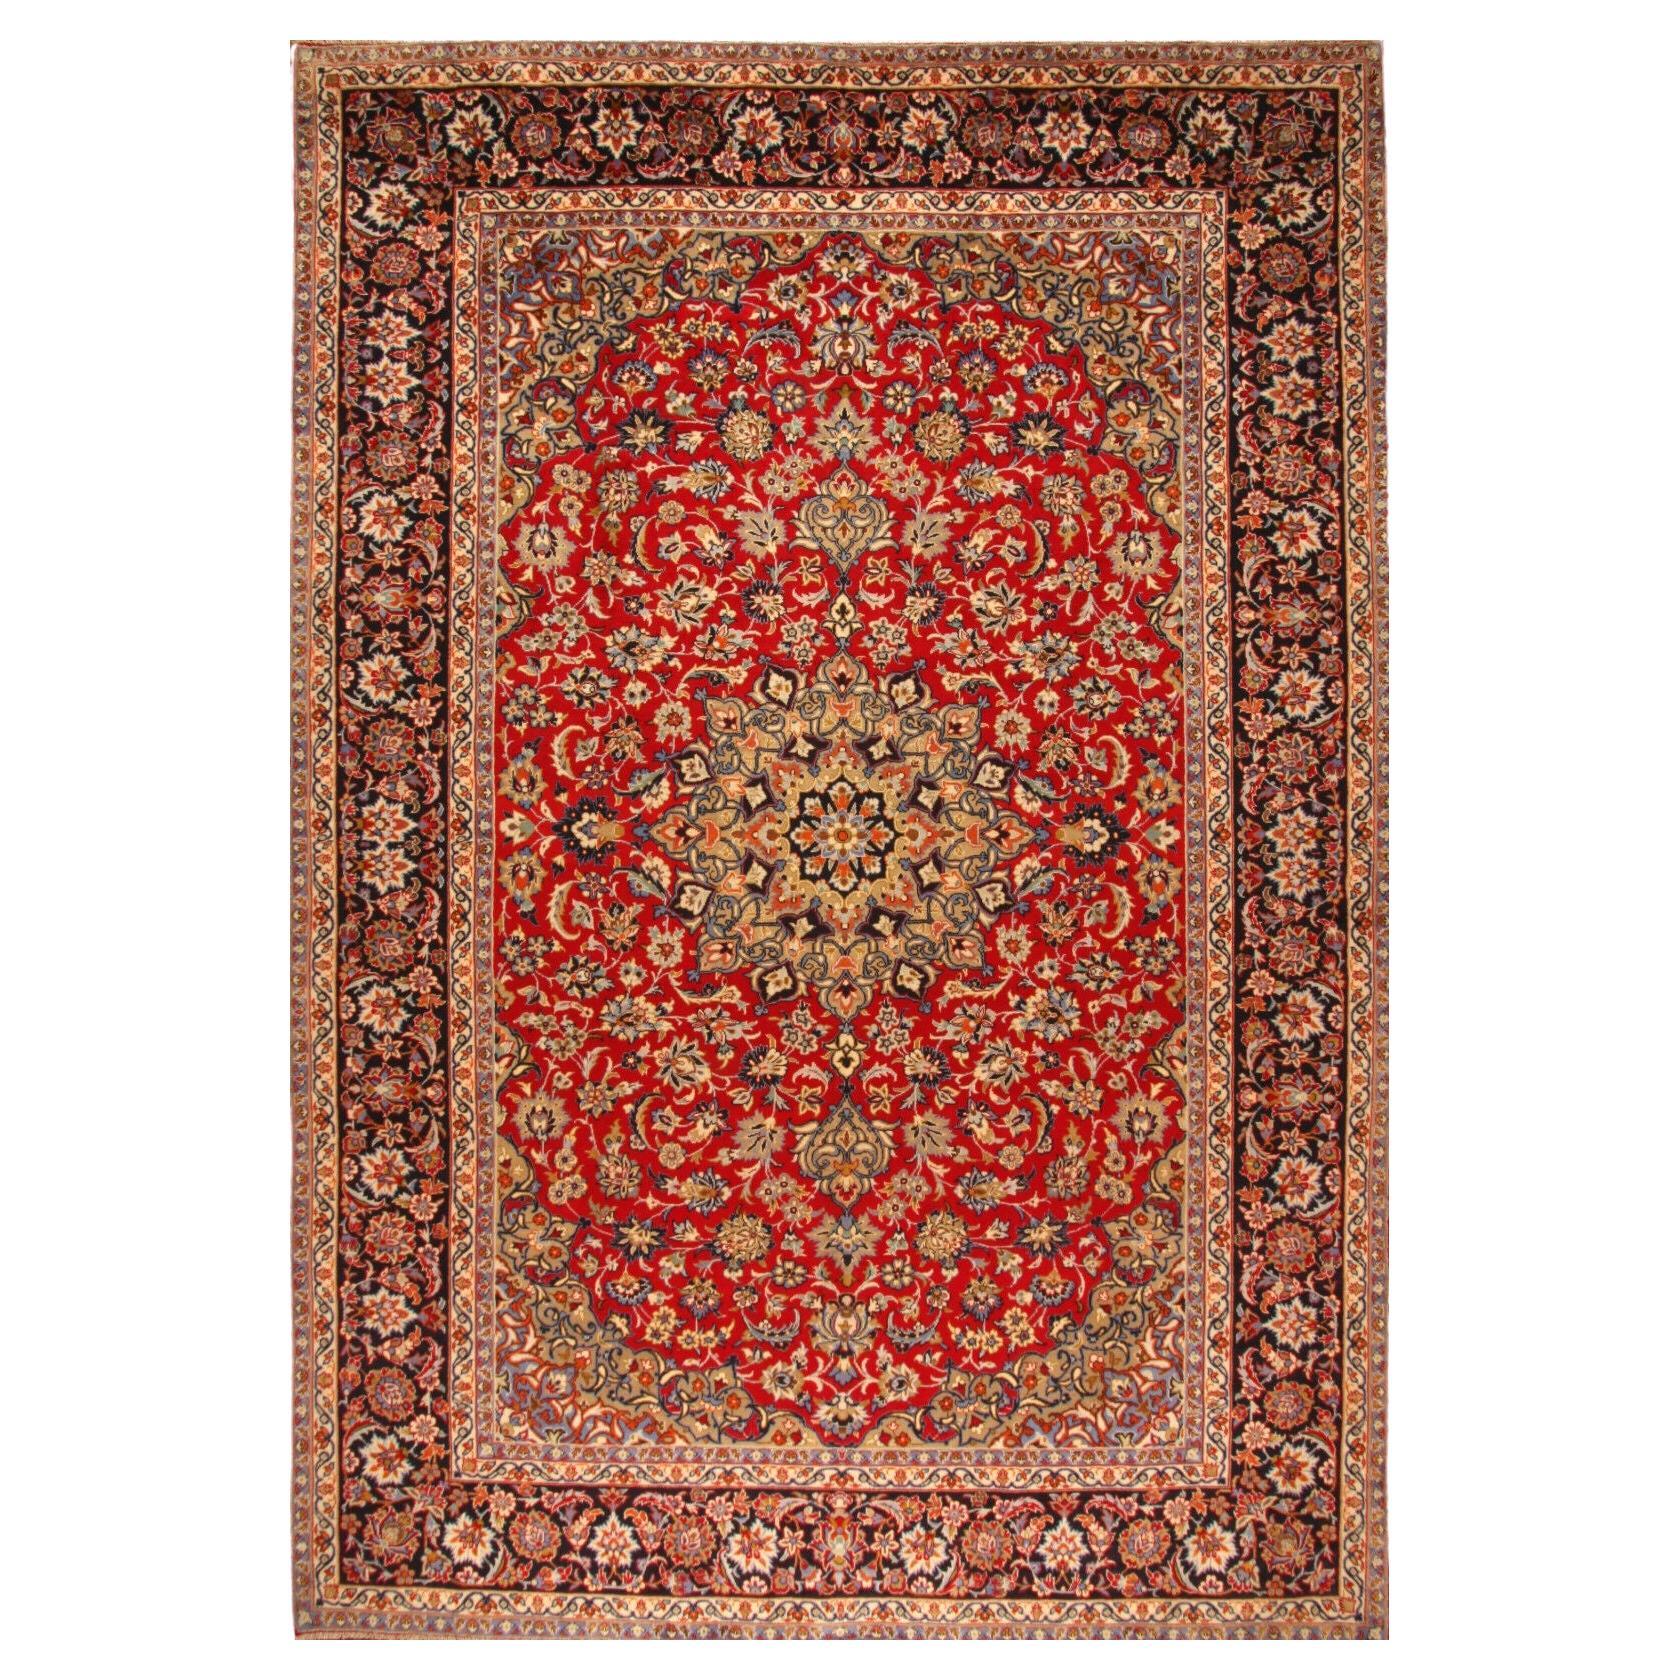 Handmade Vintage Persian Style Kashan Rug 9.6' x 14.1', 1960s - 1T15 For Sale